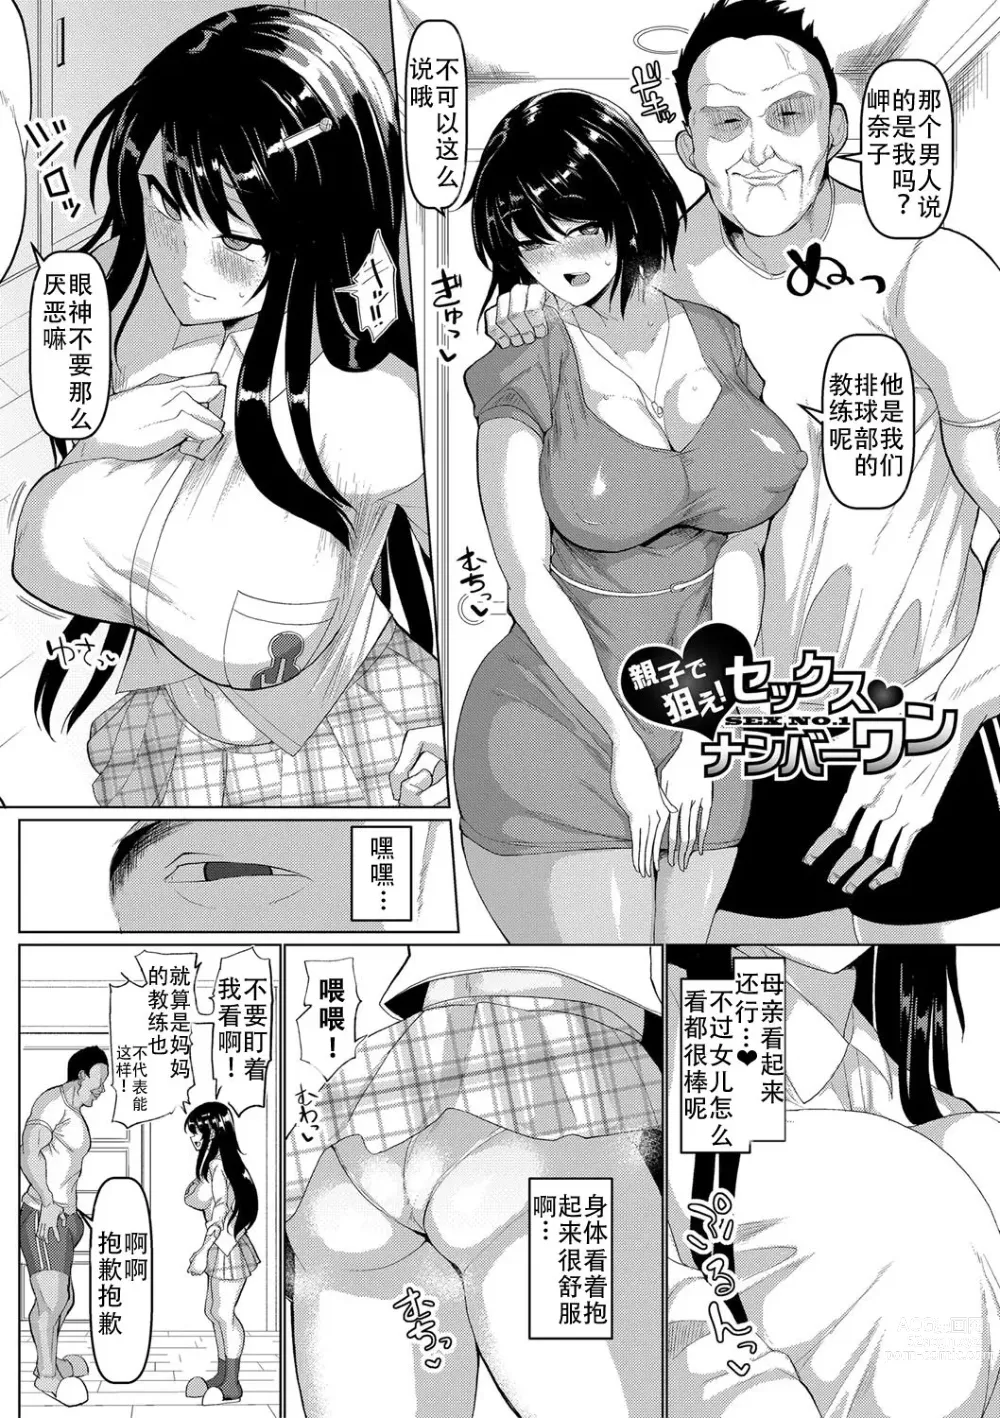 Page 2 of manga Oyako de Nerae! Sex Number One